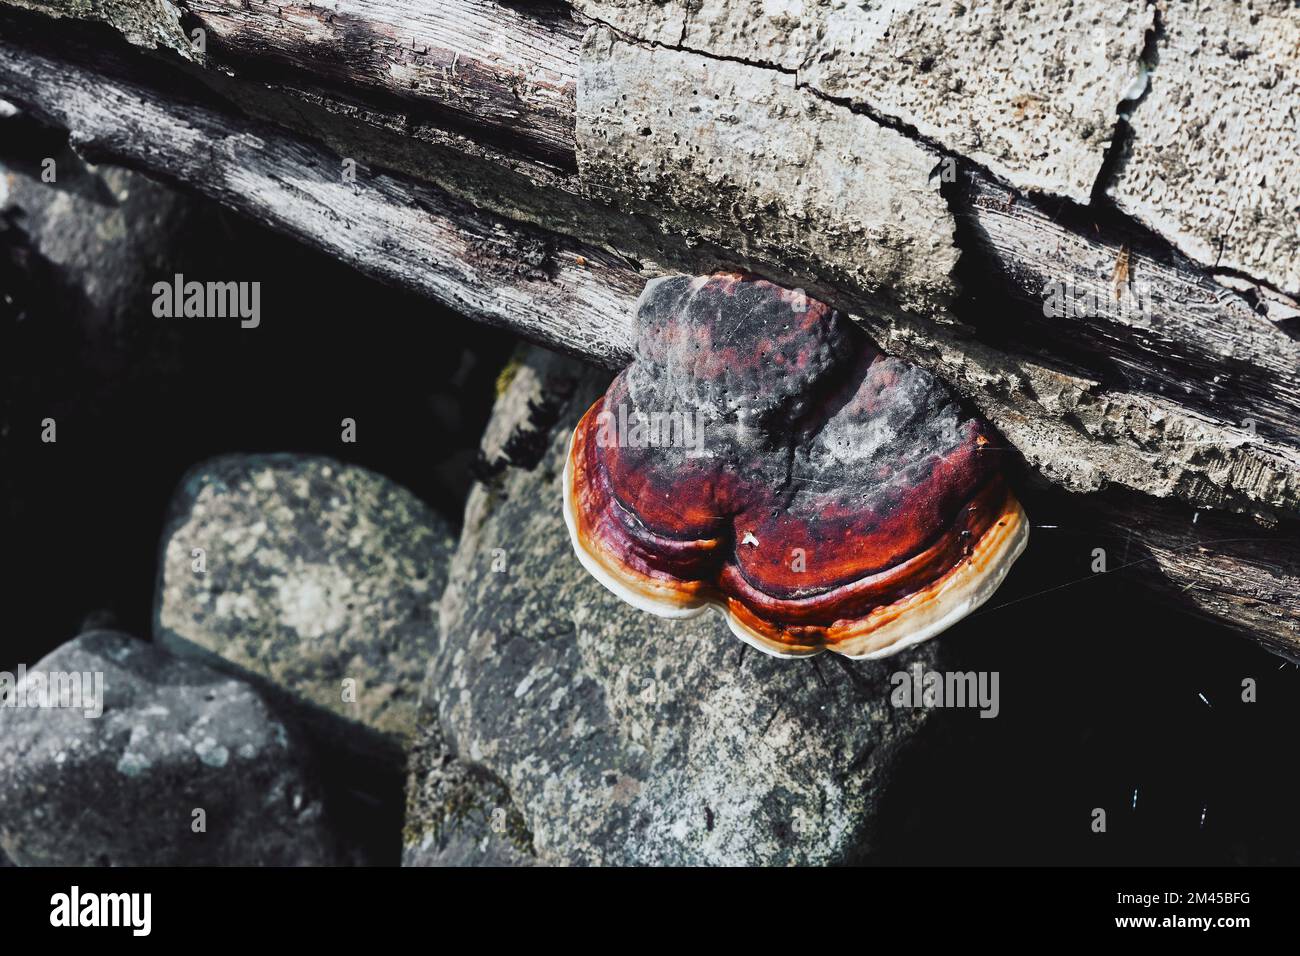 A Red-Belted Conk fungus appearing on the side of a grey stone Stock Photo